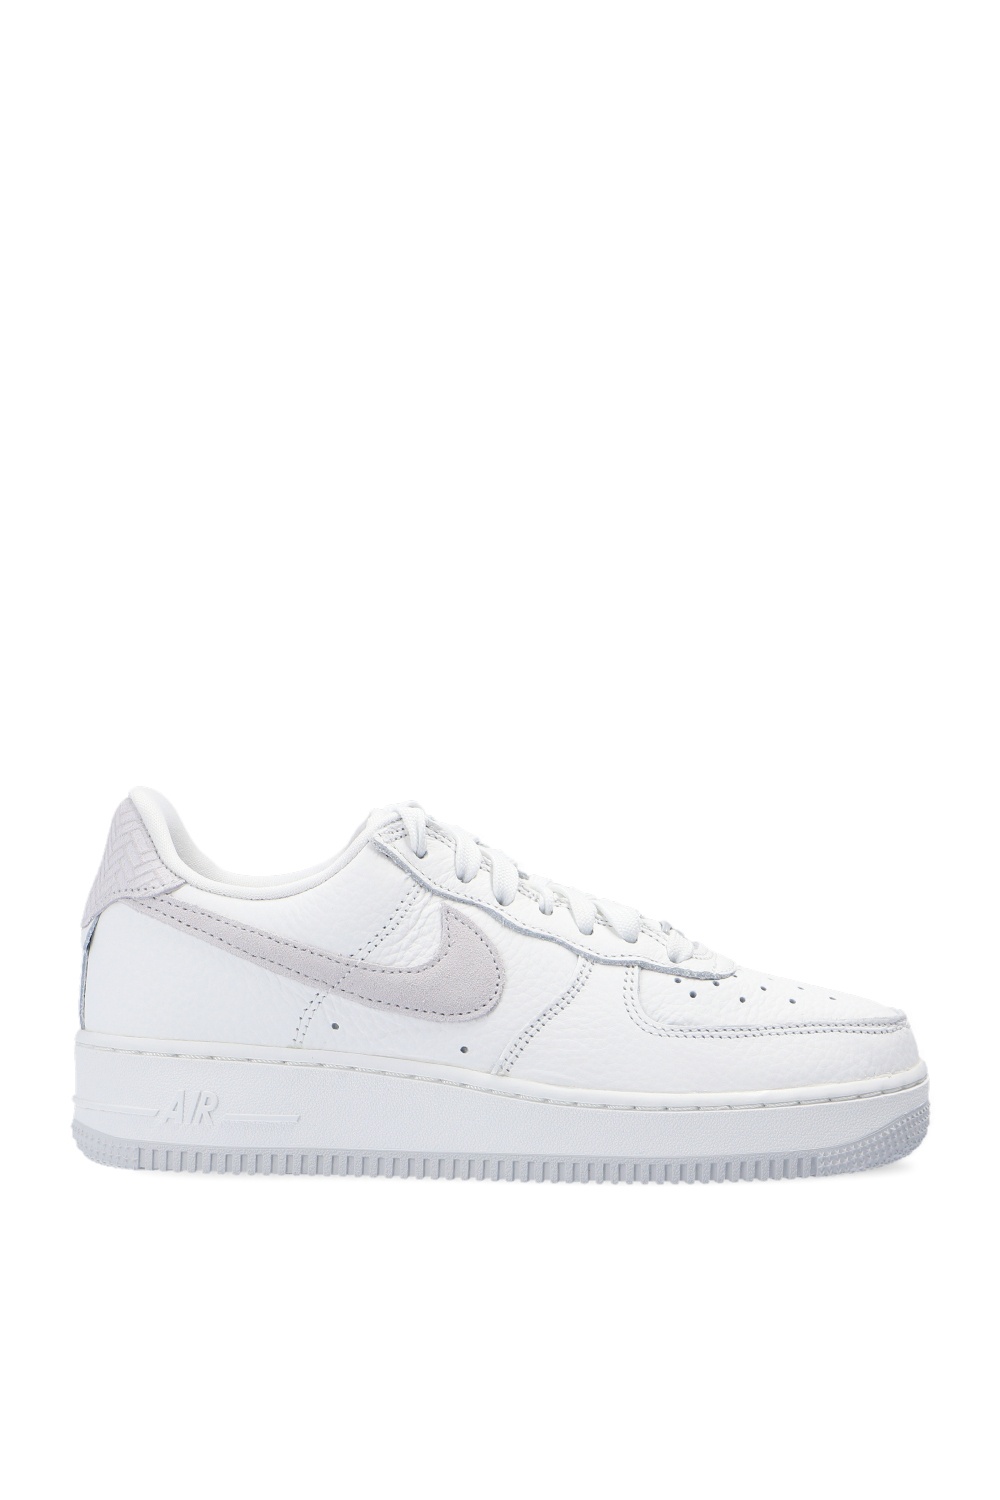 eastbay shoes air force 1